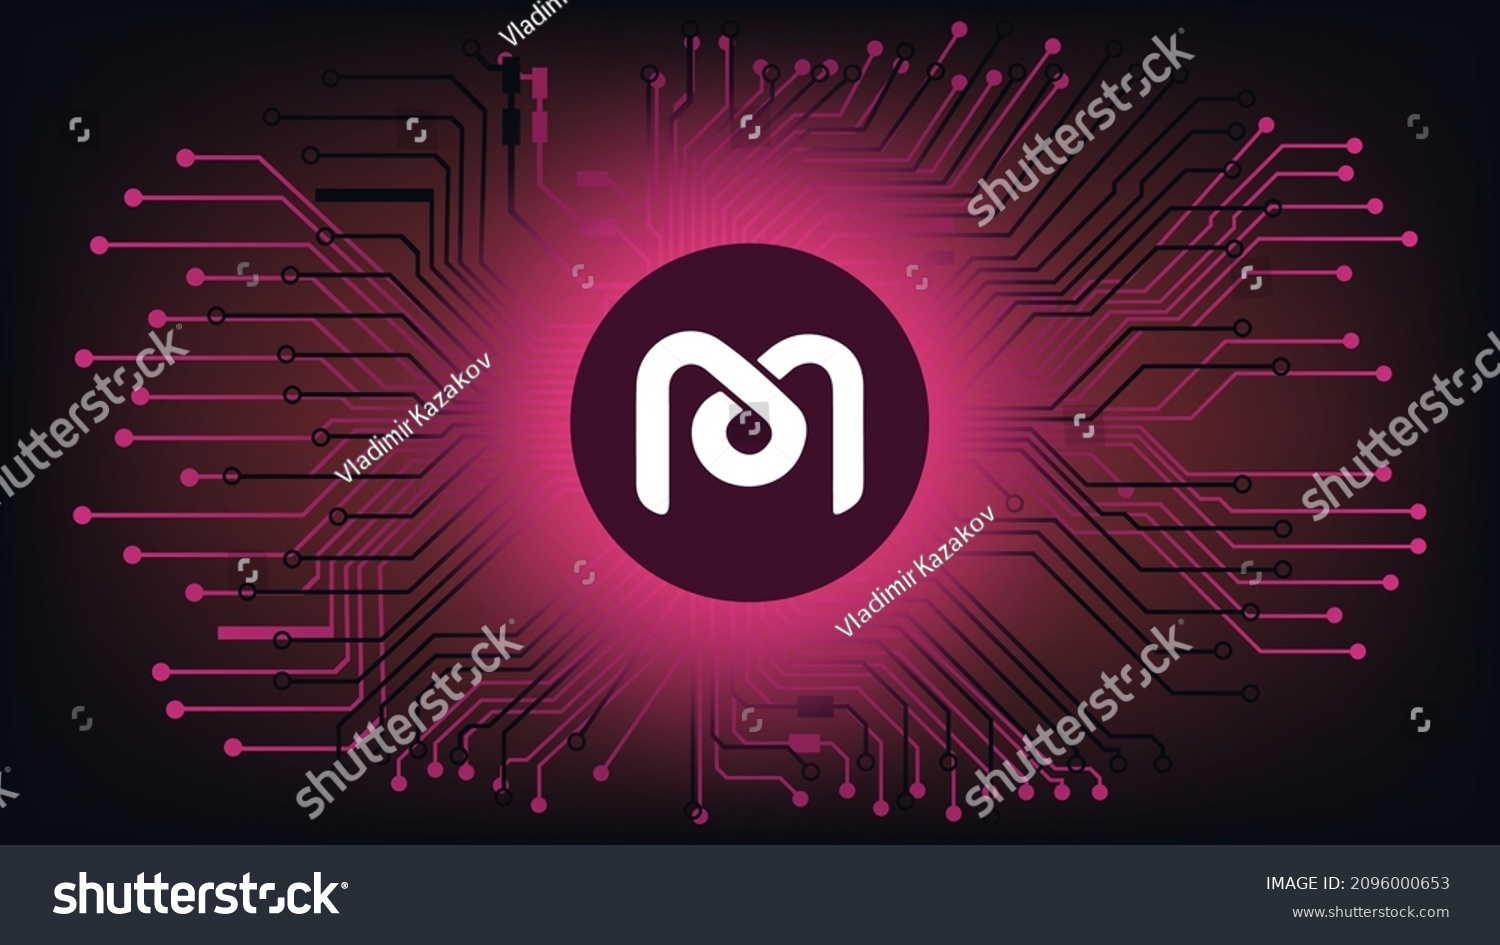 SVG of Mdex MDX cryptocurrency token symbol of the DeFi project in circle on abstract digital background with pcb tracks. Currency coin icon. Decentralized finance programs. Vector illustration. svg